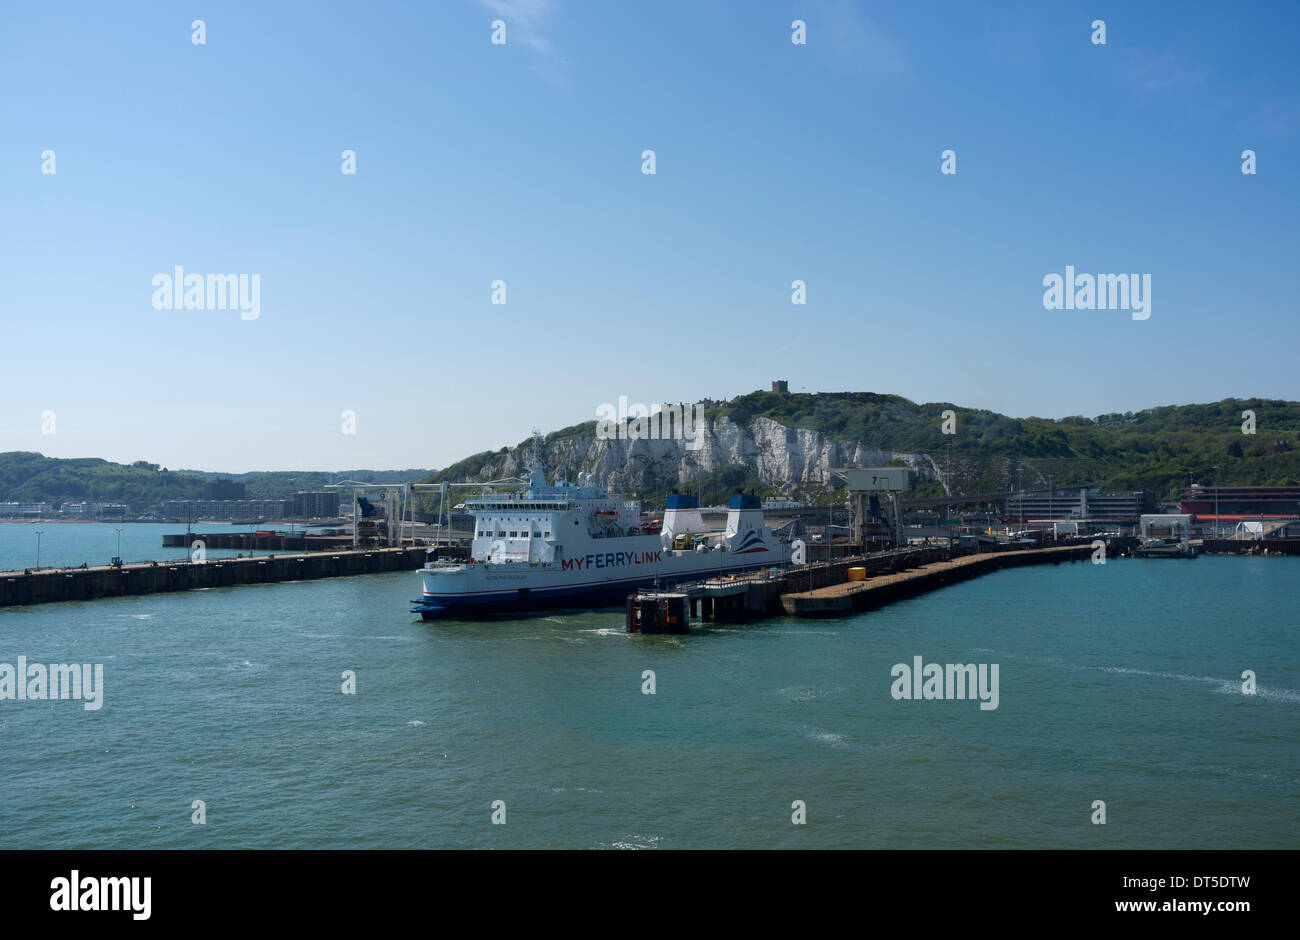 Approach from the English channel towards Dover cross channel ferry port. Stock Photo